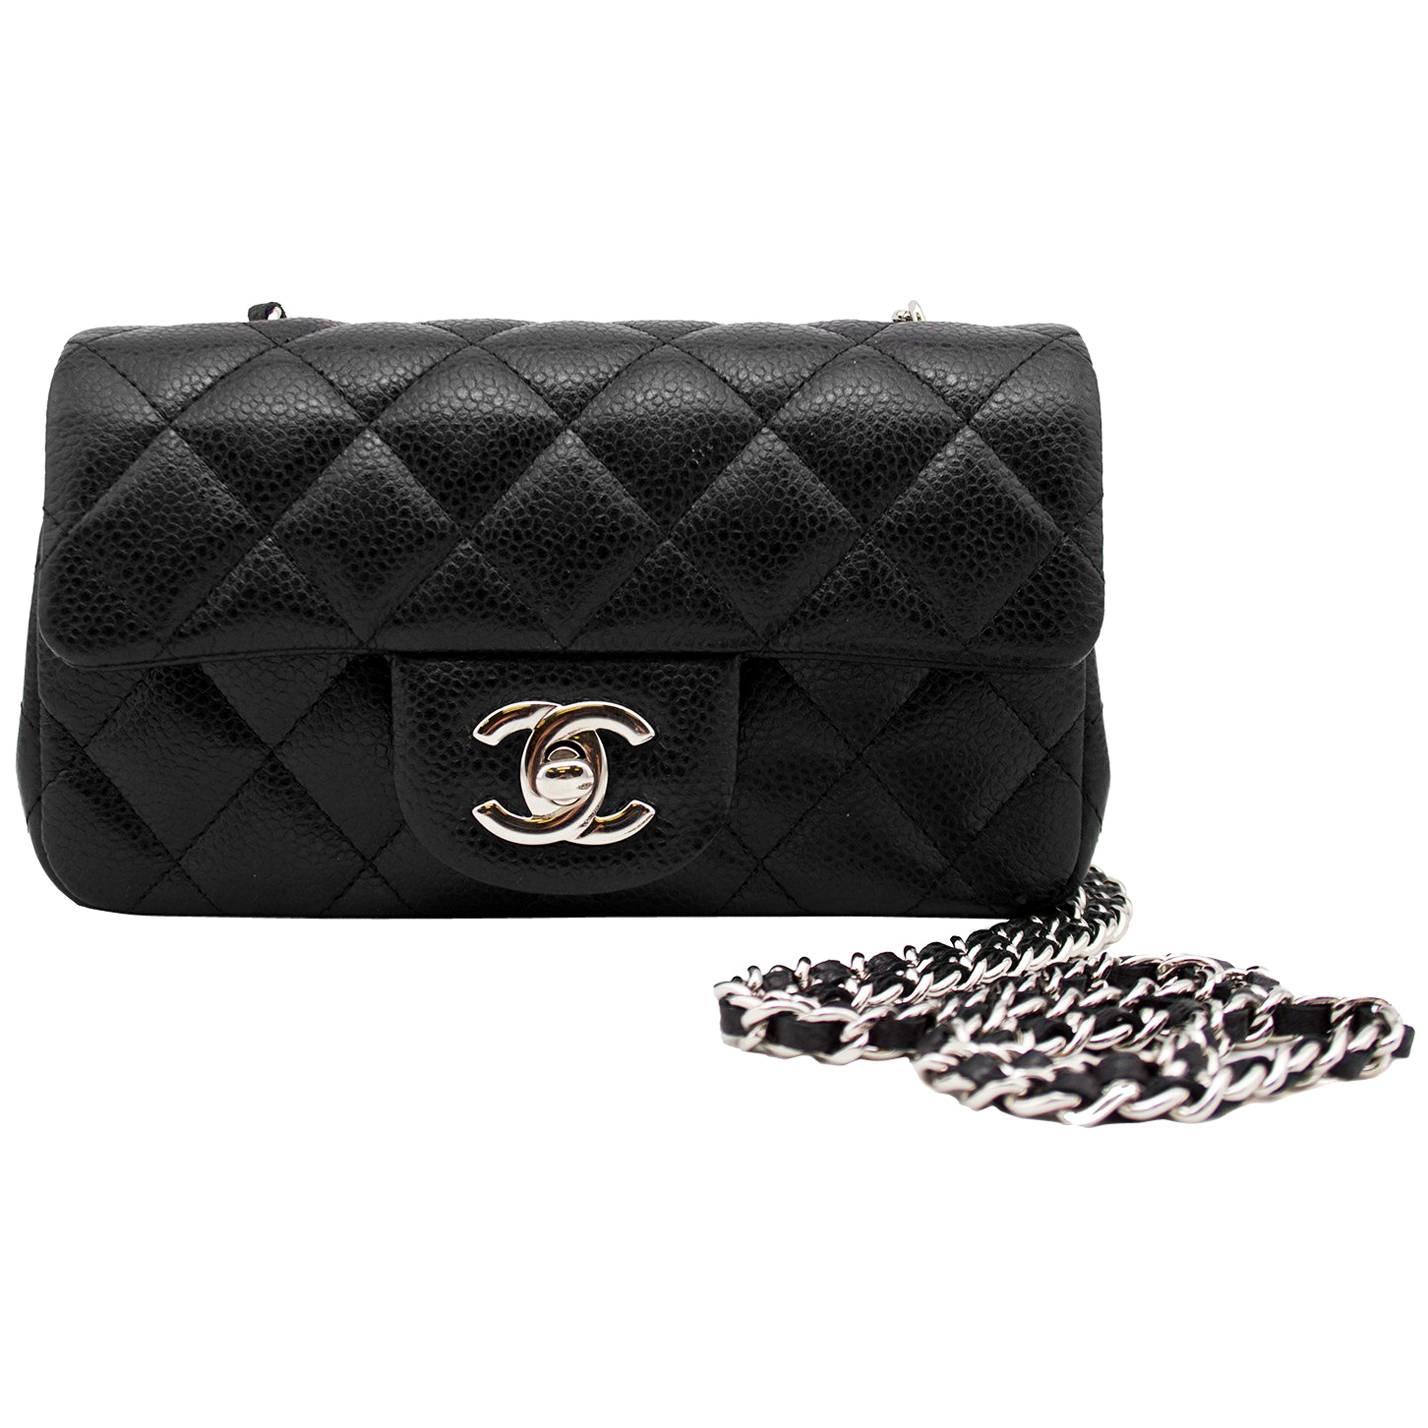 2013 Chanel Black Quilted Caviar Leather Chanel Classic Mini Flap Bag